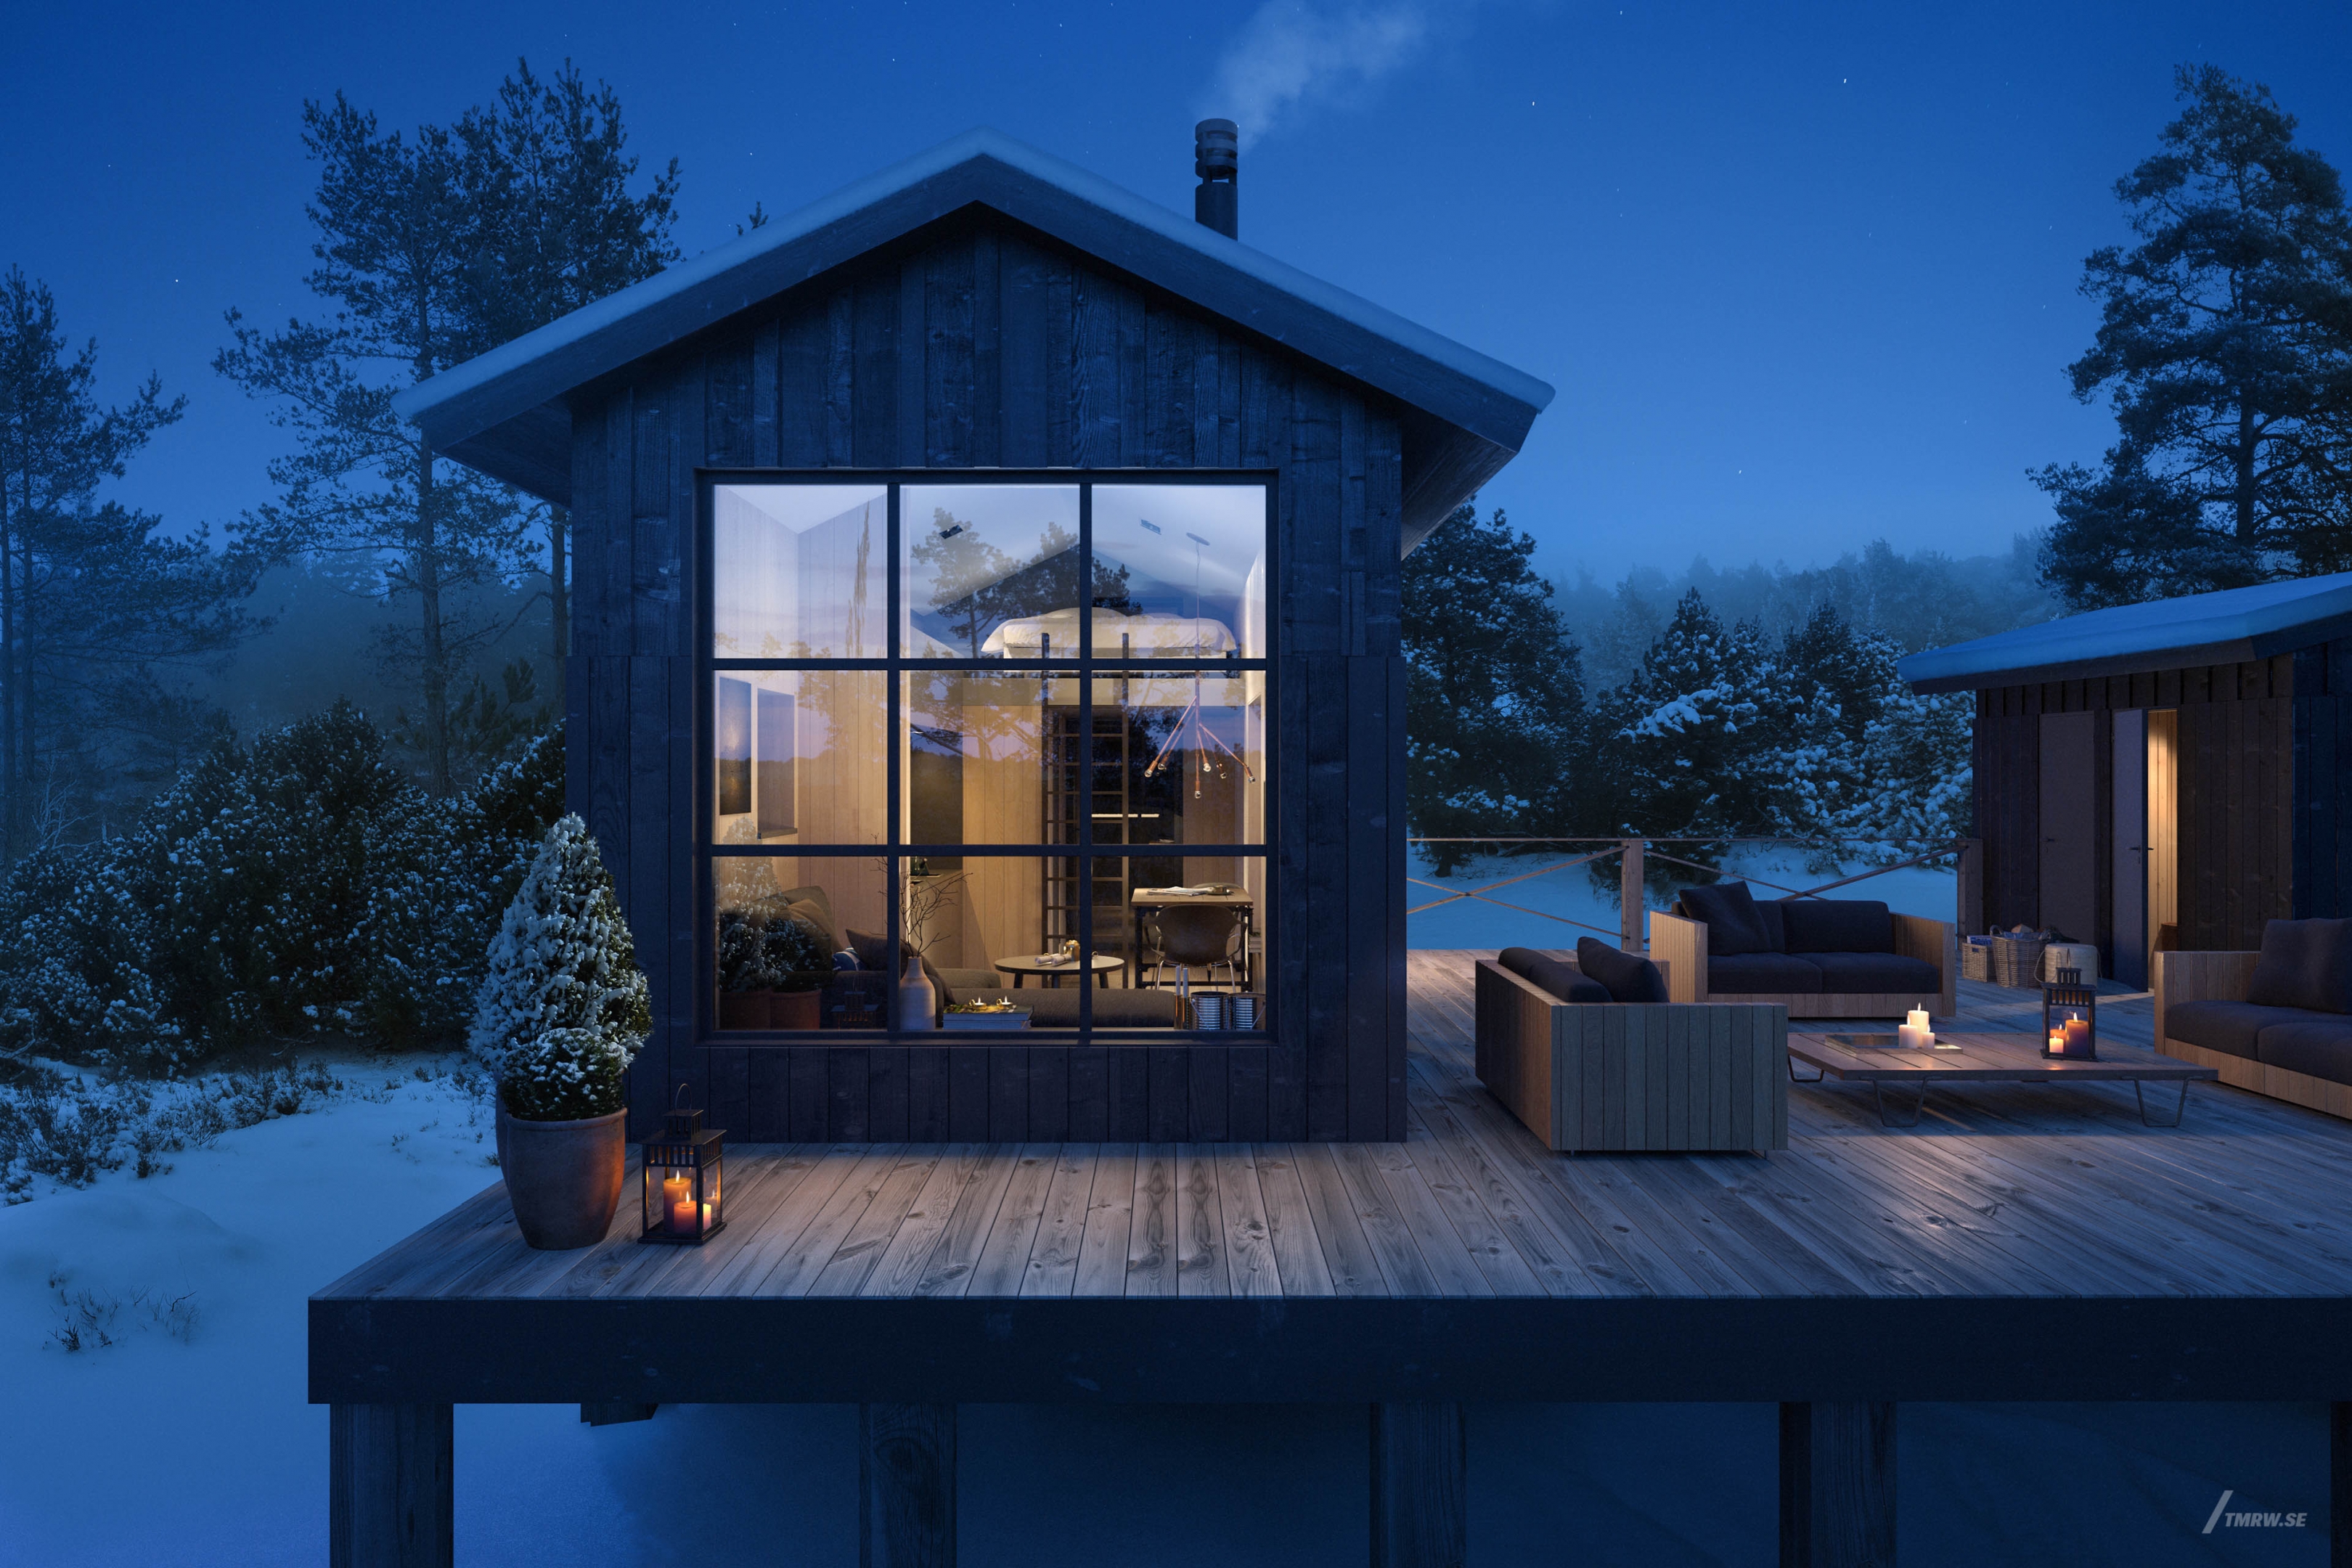 Architectural visualization of Lofsdalen for Bleck, small residential house in a winter landscape